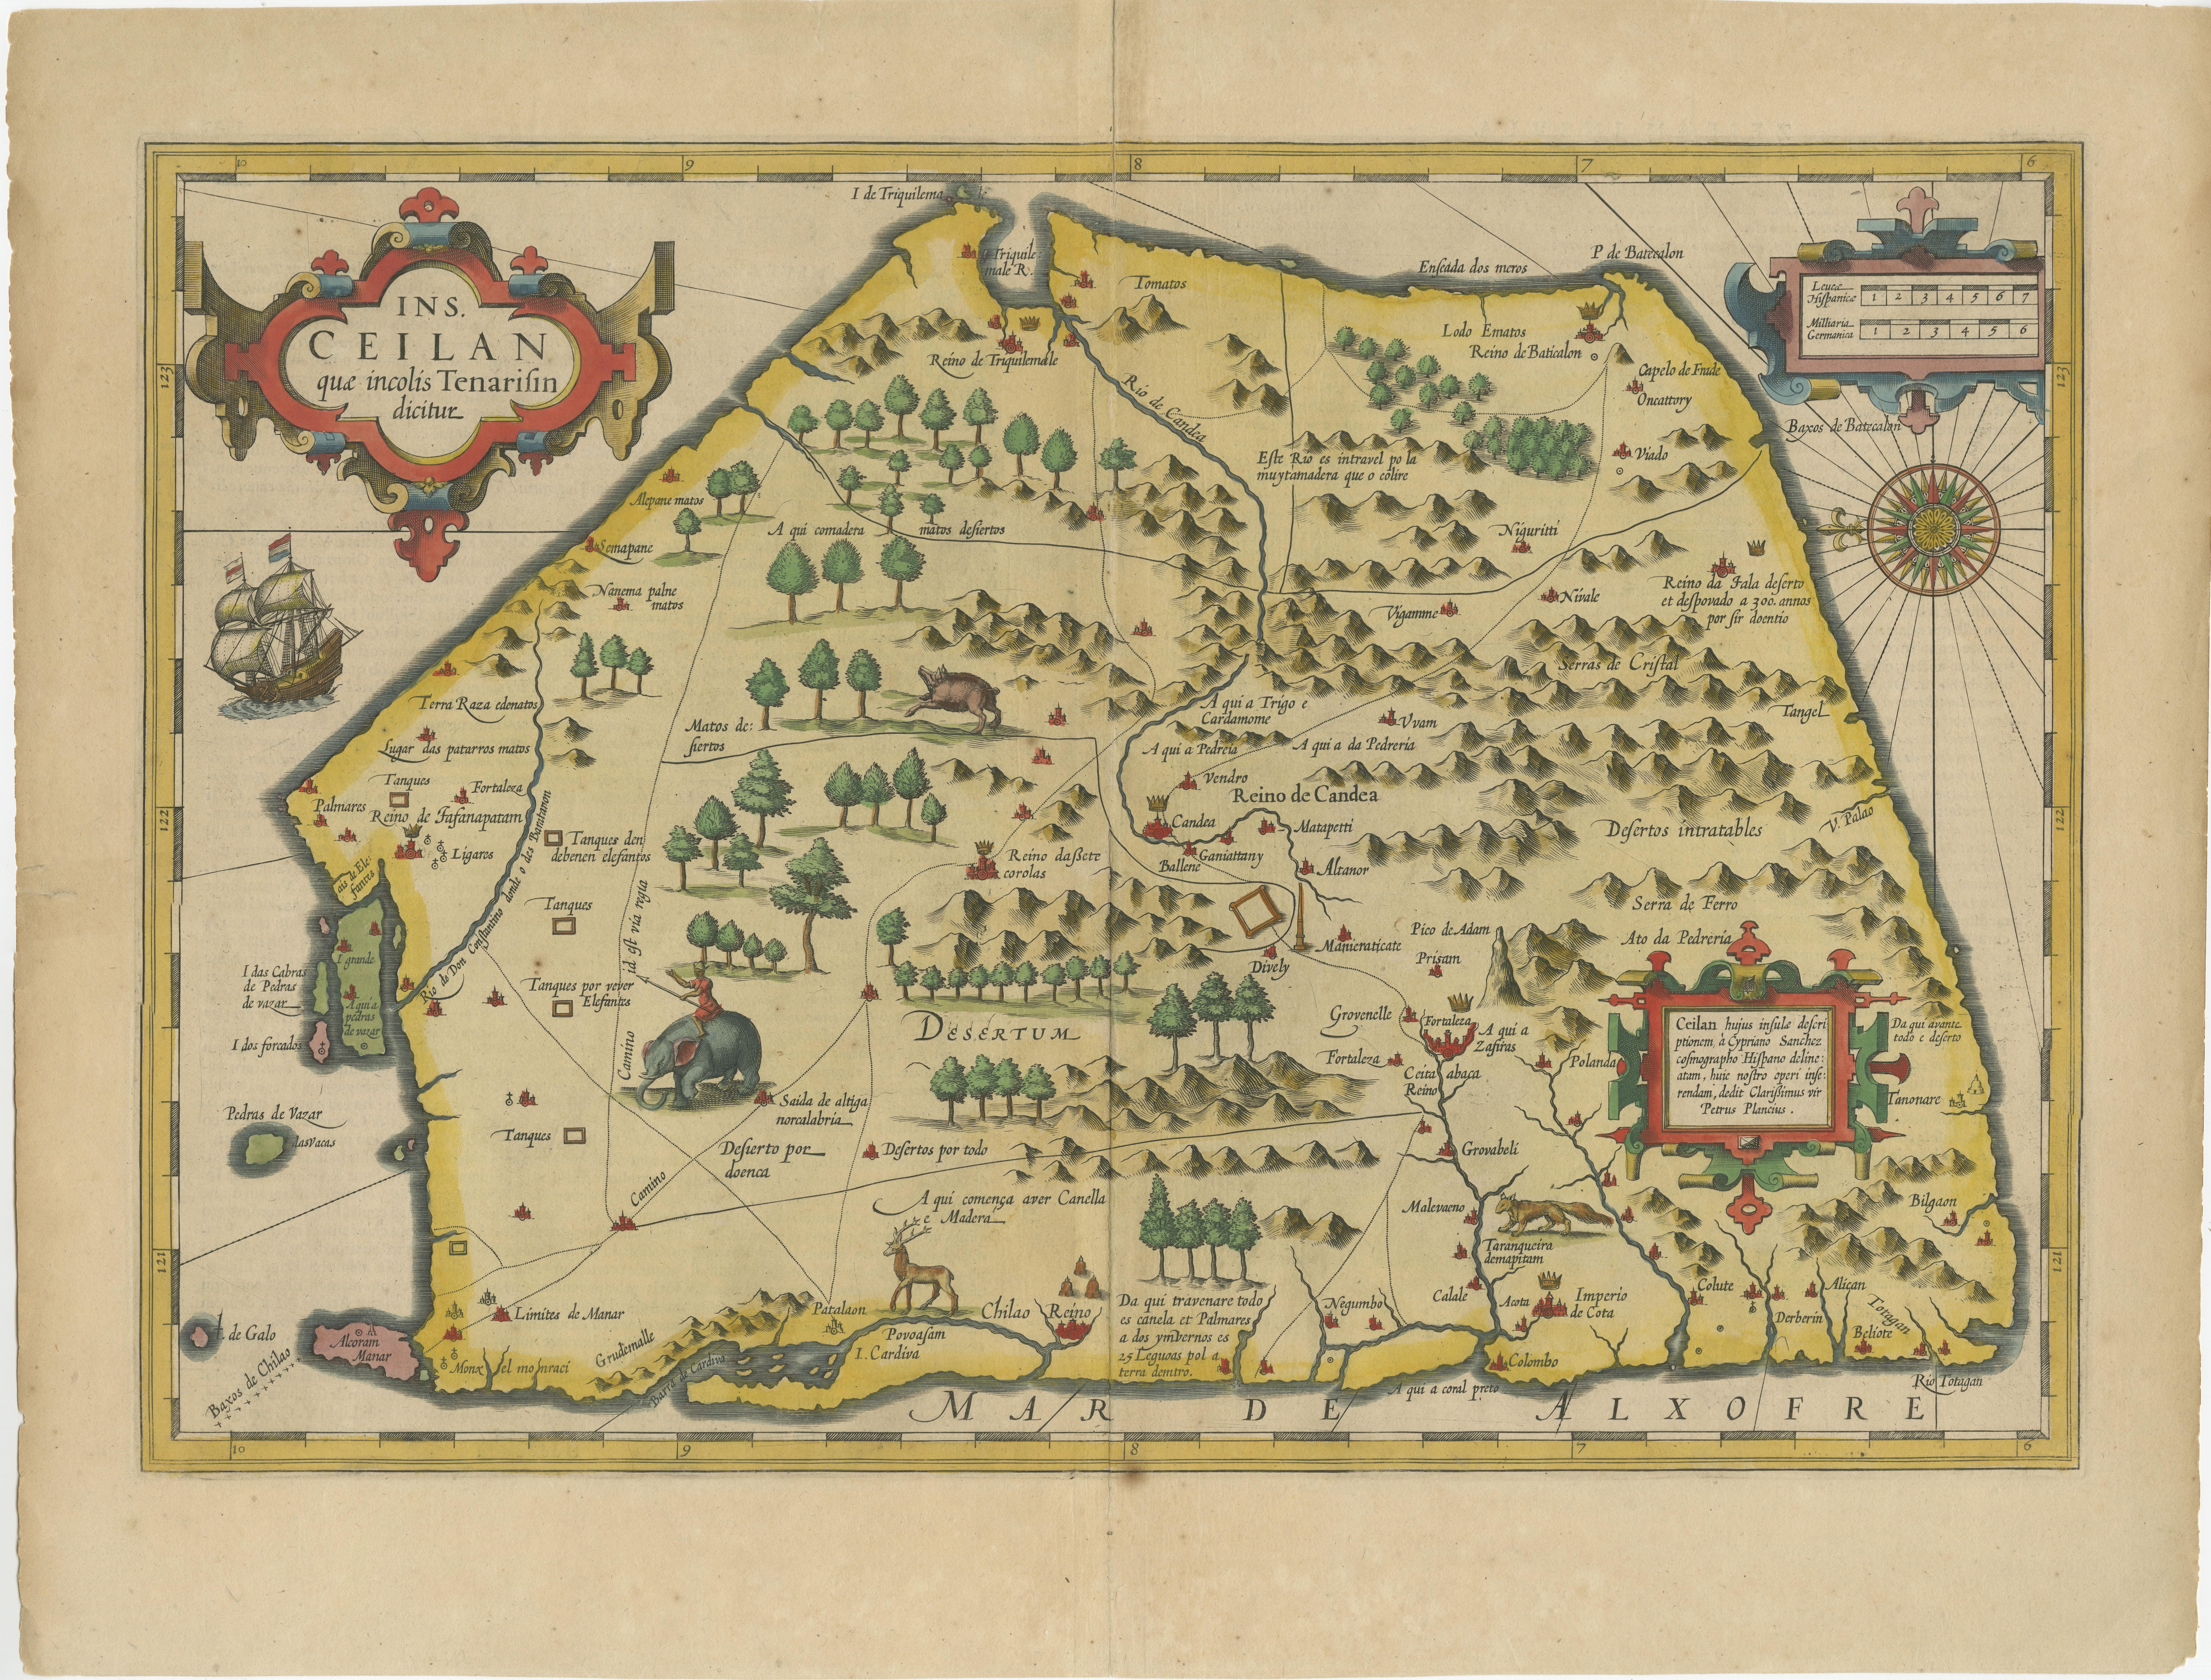 Antique map titled 'Ins. Ceilan quae incolis Tenarisin dicitur'. This exquisite, early map of Sri Lanka is shown with an unusual five-sided shape. North is oriented to the left by an elaborate compass rose. The map was beautifully engraved by Petrus